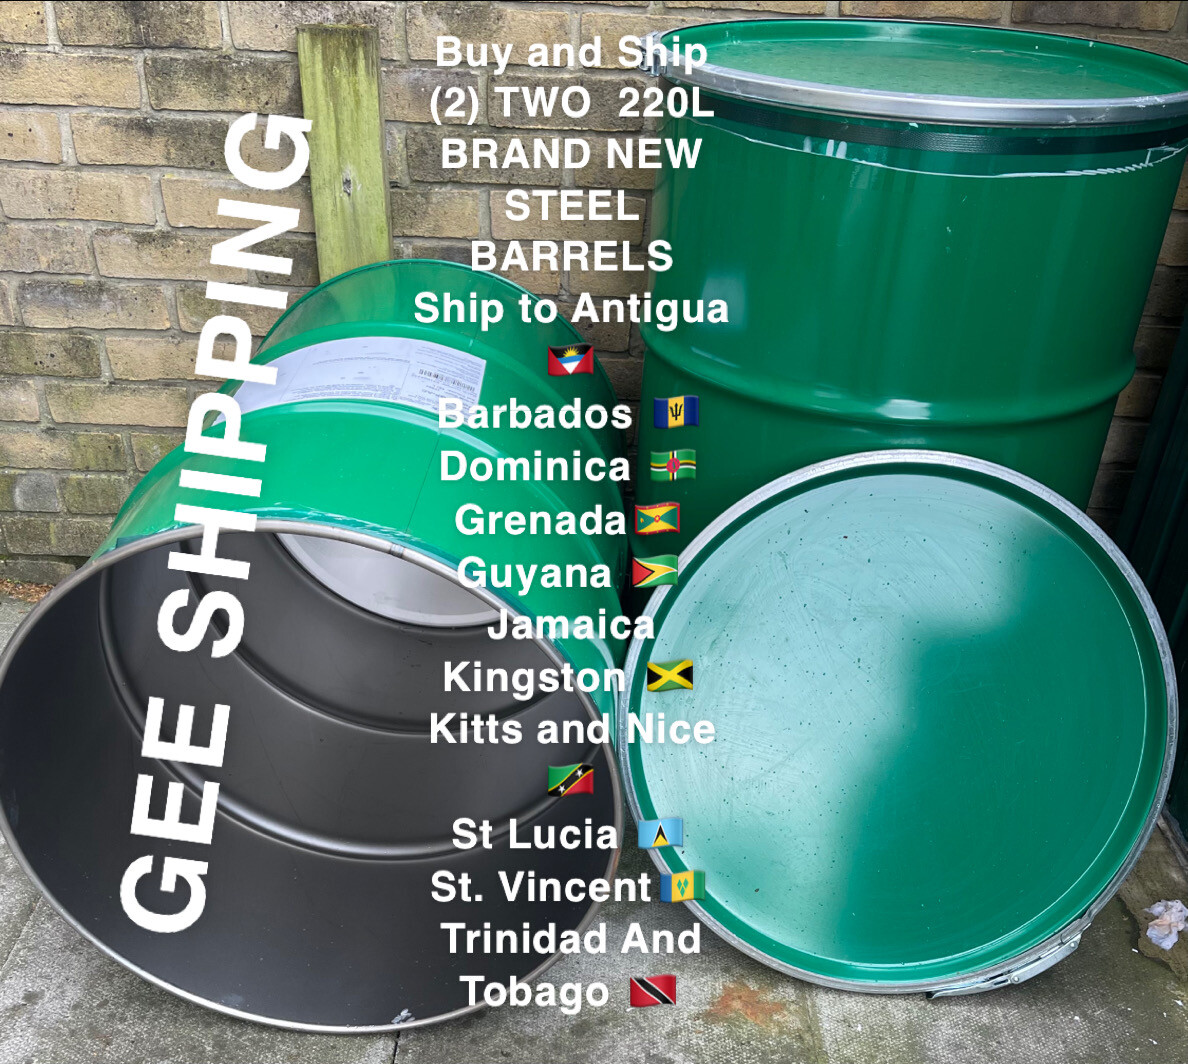 Buy and Ship (2) Steel Barrels to Ship to Antigua🇦🇬 Barbados 🇧🇧 Dominica 🇩🇲 Grenada🇬🇩 Guyana 🇬🇾 Kitts and Nice 🇰🇳 Jamaica Kingston🇯🇲 St Lucia 🇱🇨 St.Vincent🇻🇨 Trinidad & Tobago🇹🇹.